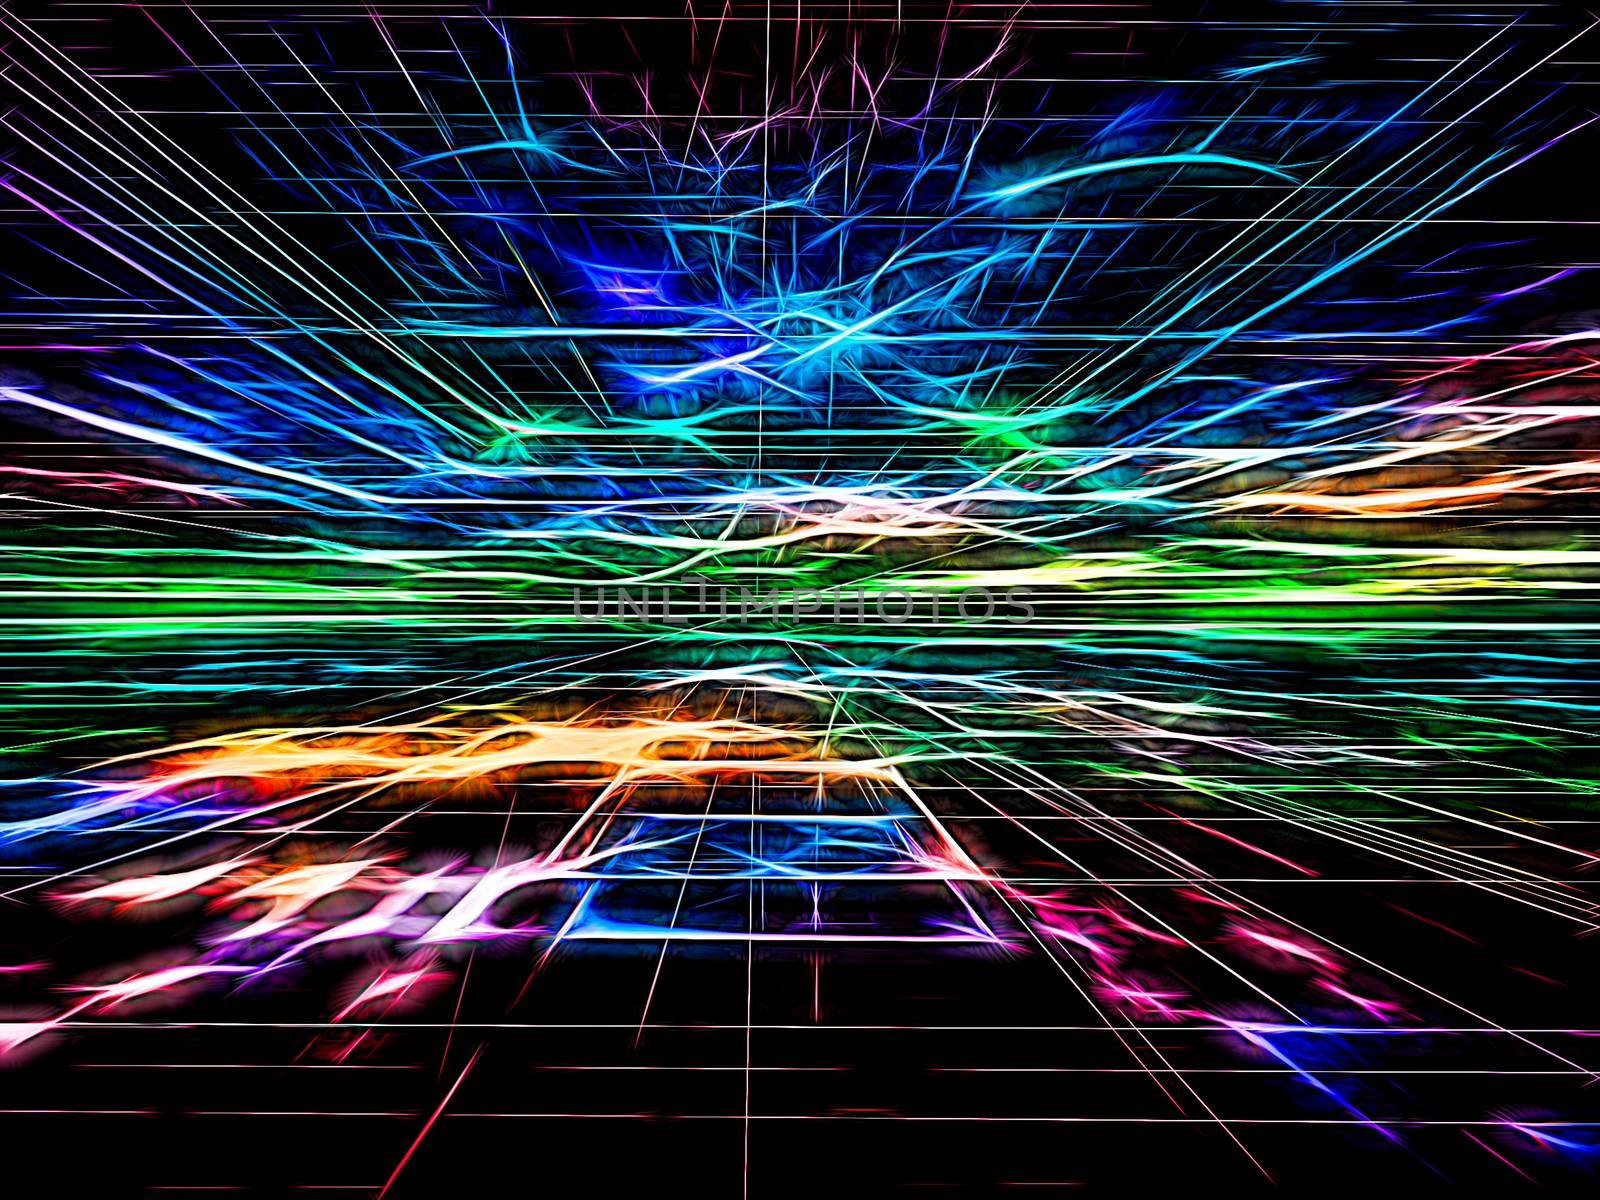 Abstract bright technology background -  computer-generated image. Fractal geometry: colourful surface, horizon and chaos neon glowing lines like flashes. Trendy tech or virtual reality concept.